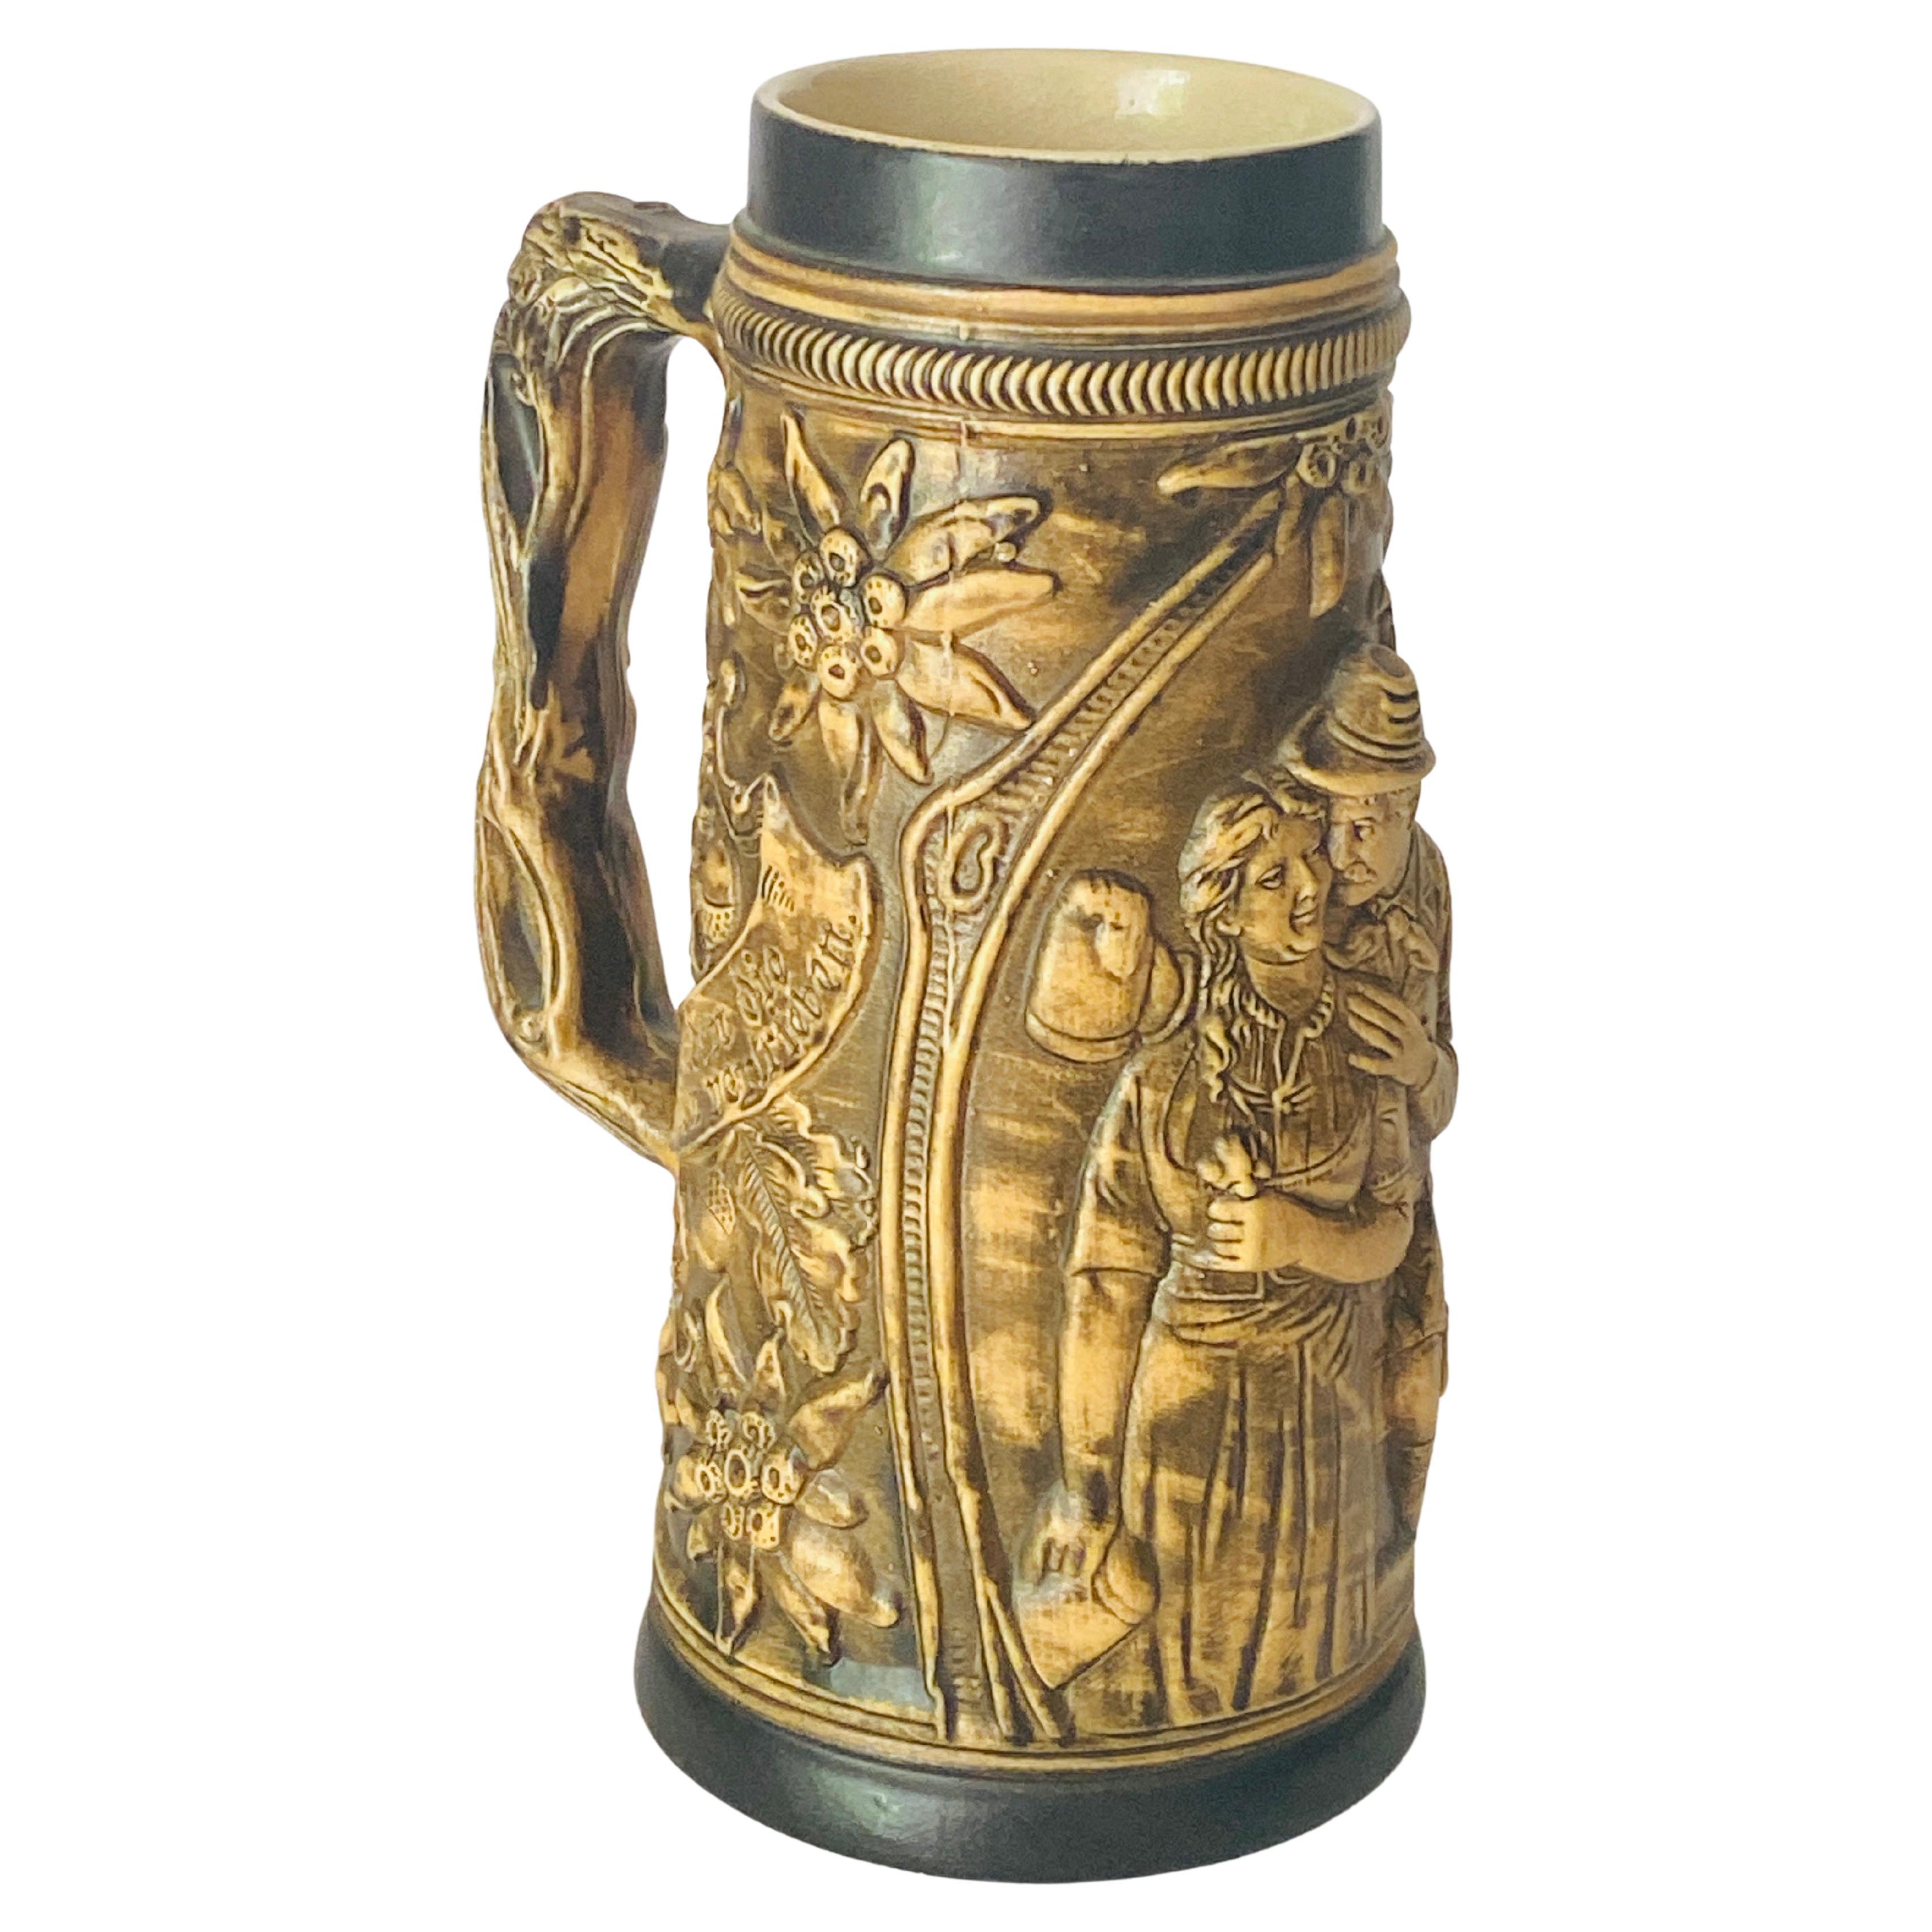 What are German beer steins for?